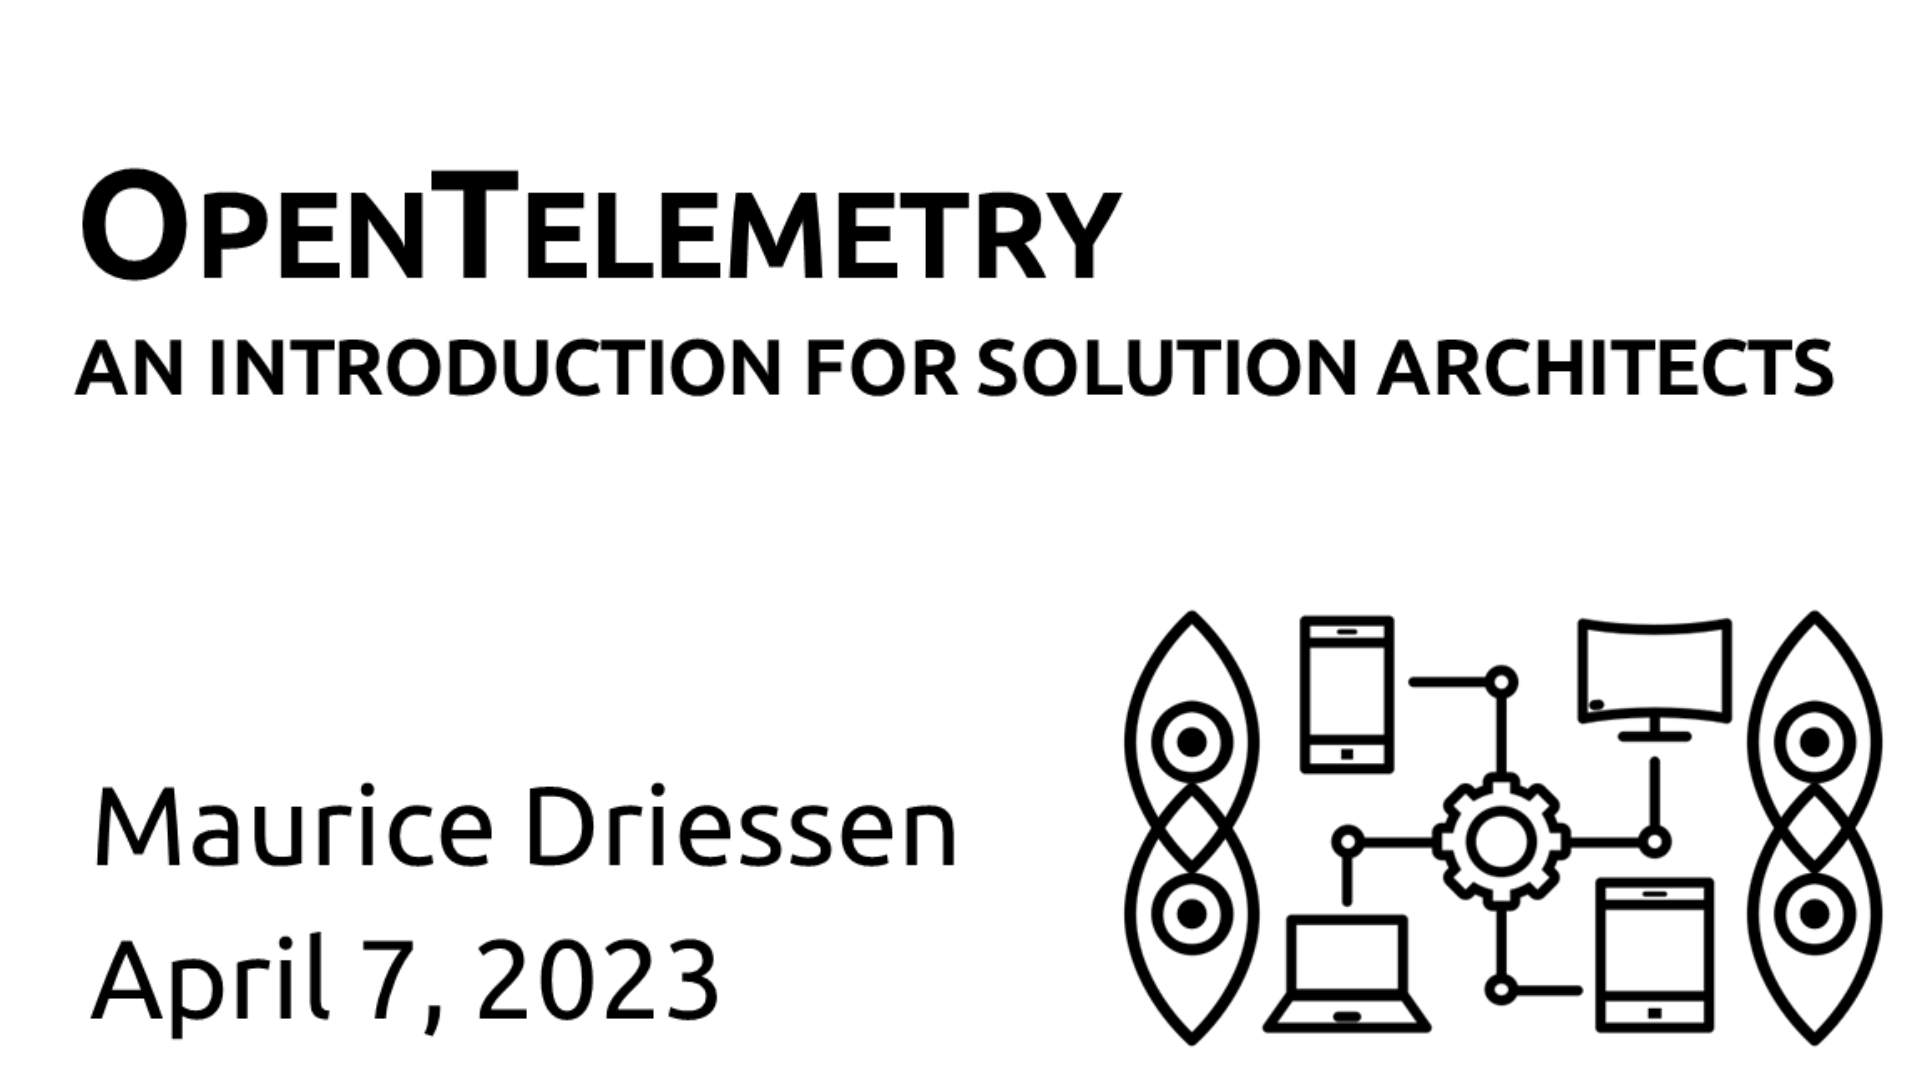 OpenTelemetry, an introduction for solution architects